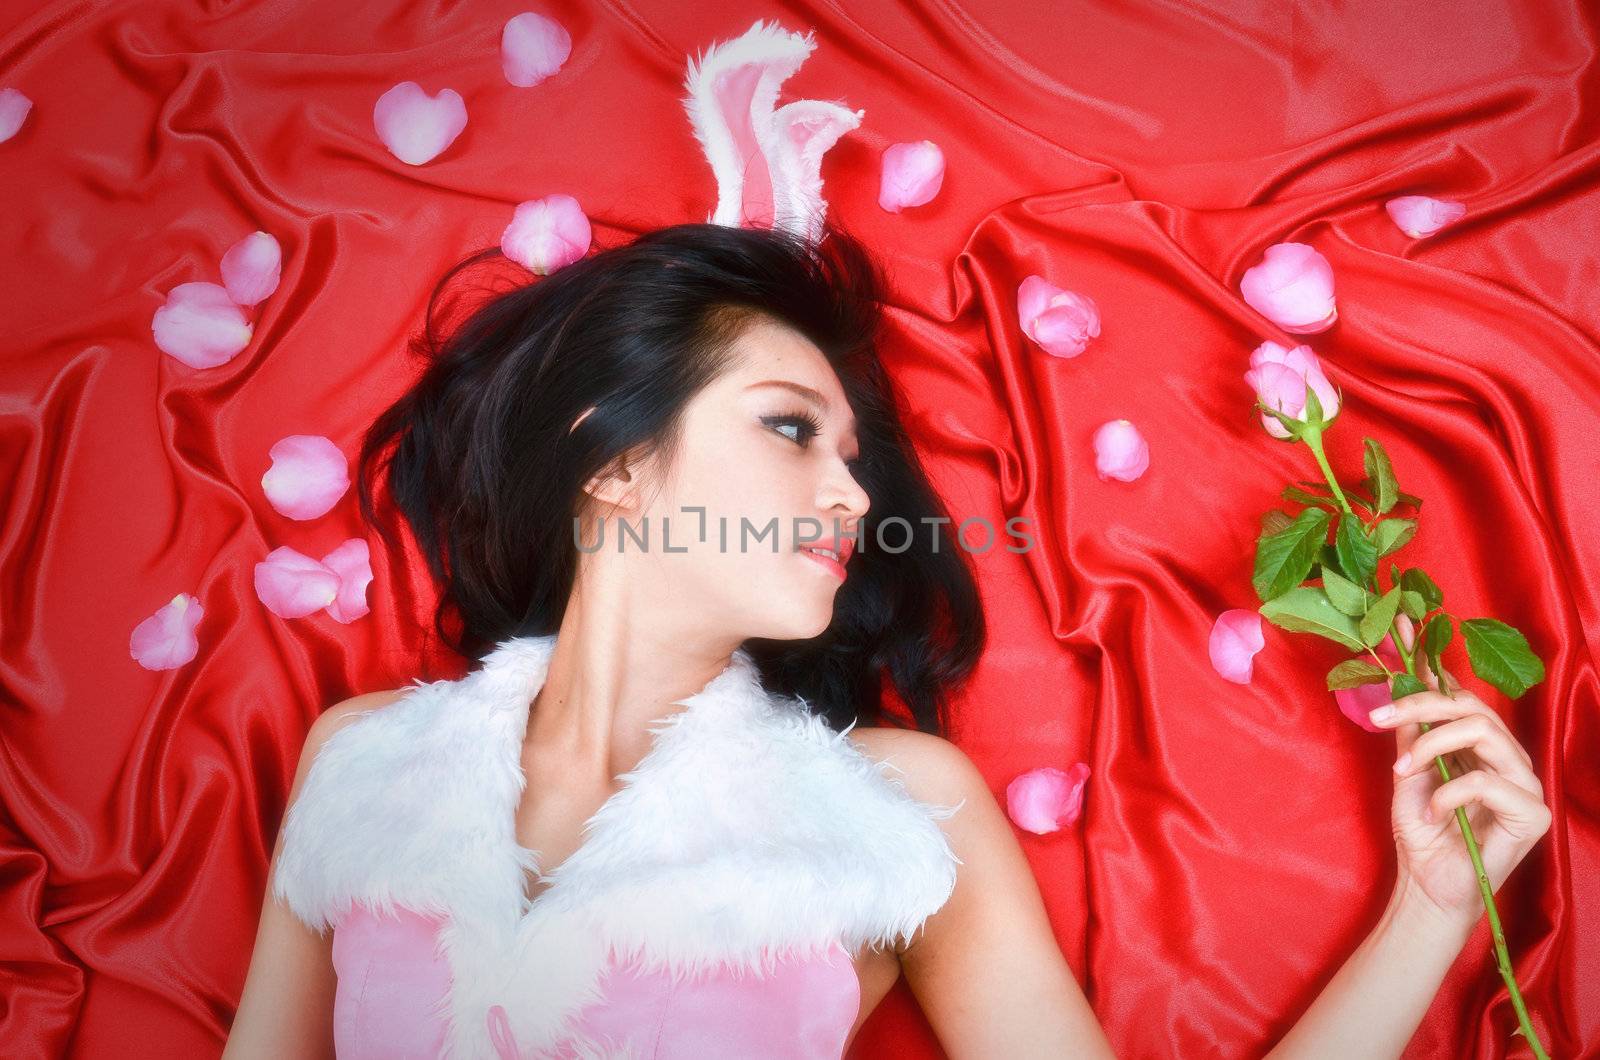 Sexy bunny girl hold pink rose lie on red fabric